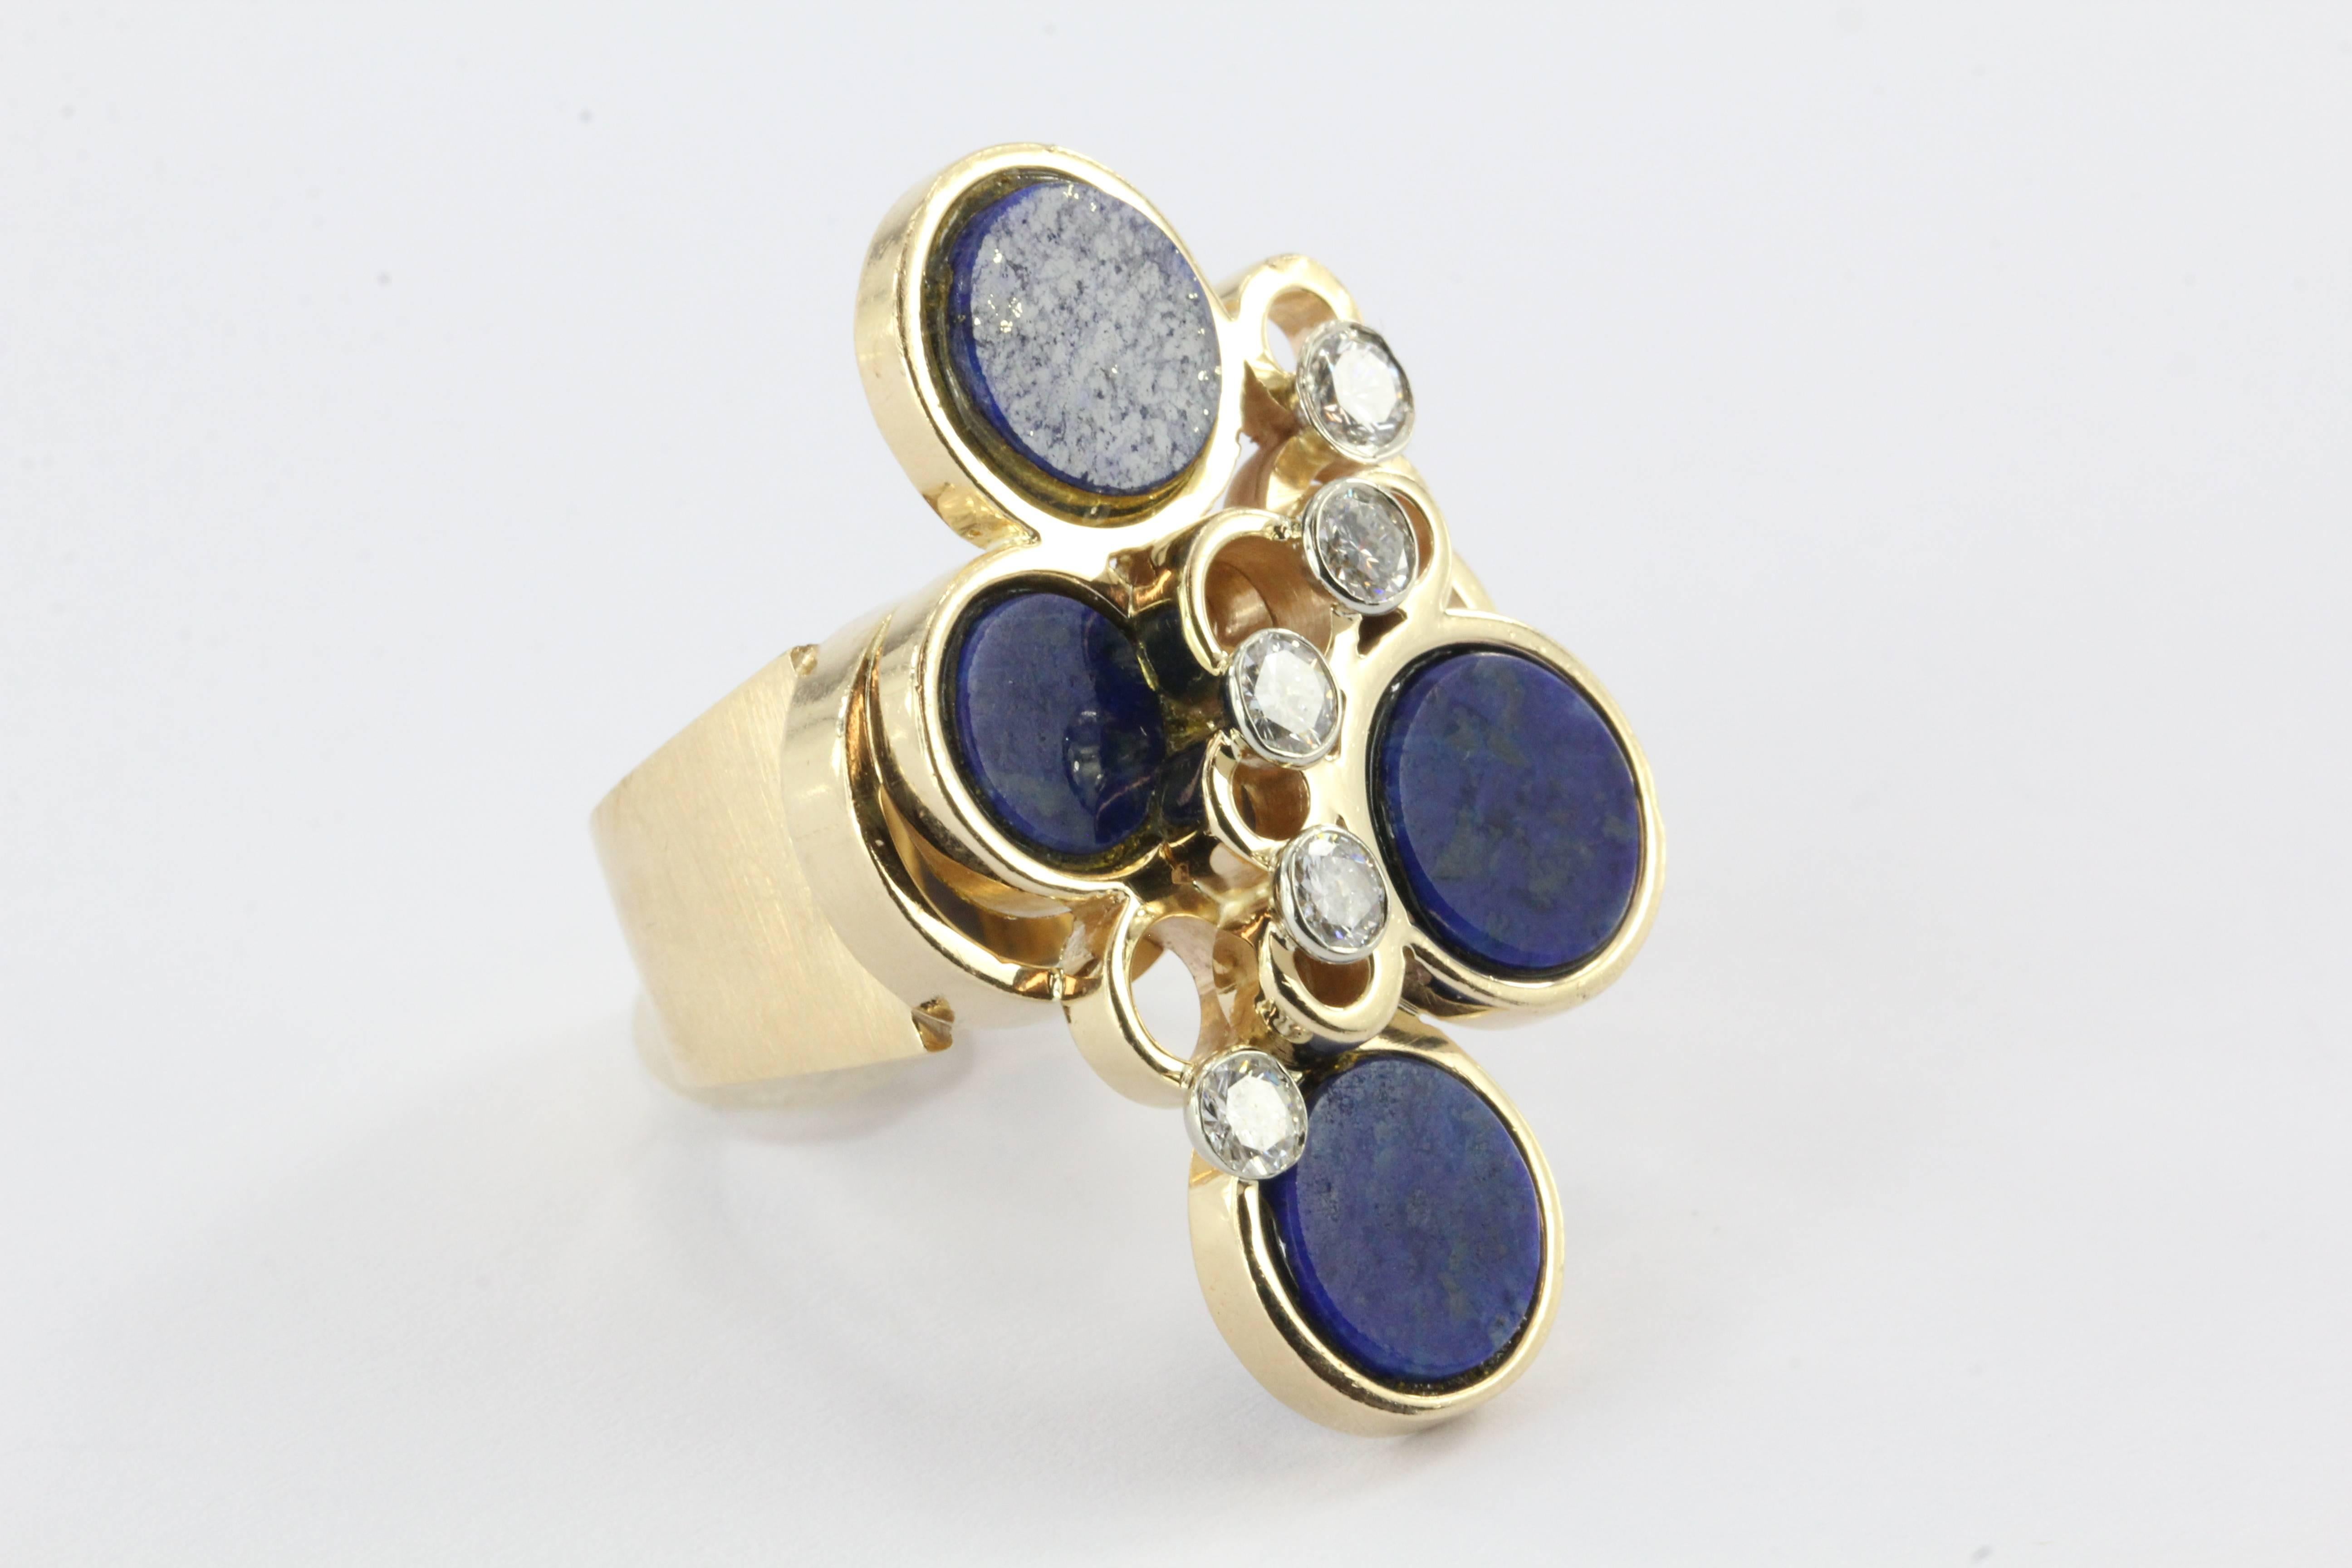 This fantastic mid century lapis and diamond cocktail ring is high on style and low on profile -  making it extremely wearable and an option for everyday use. 

The 14k yellow gold ring is embellished with four discs of lapis (each measuring 8.6mm